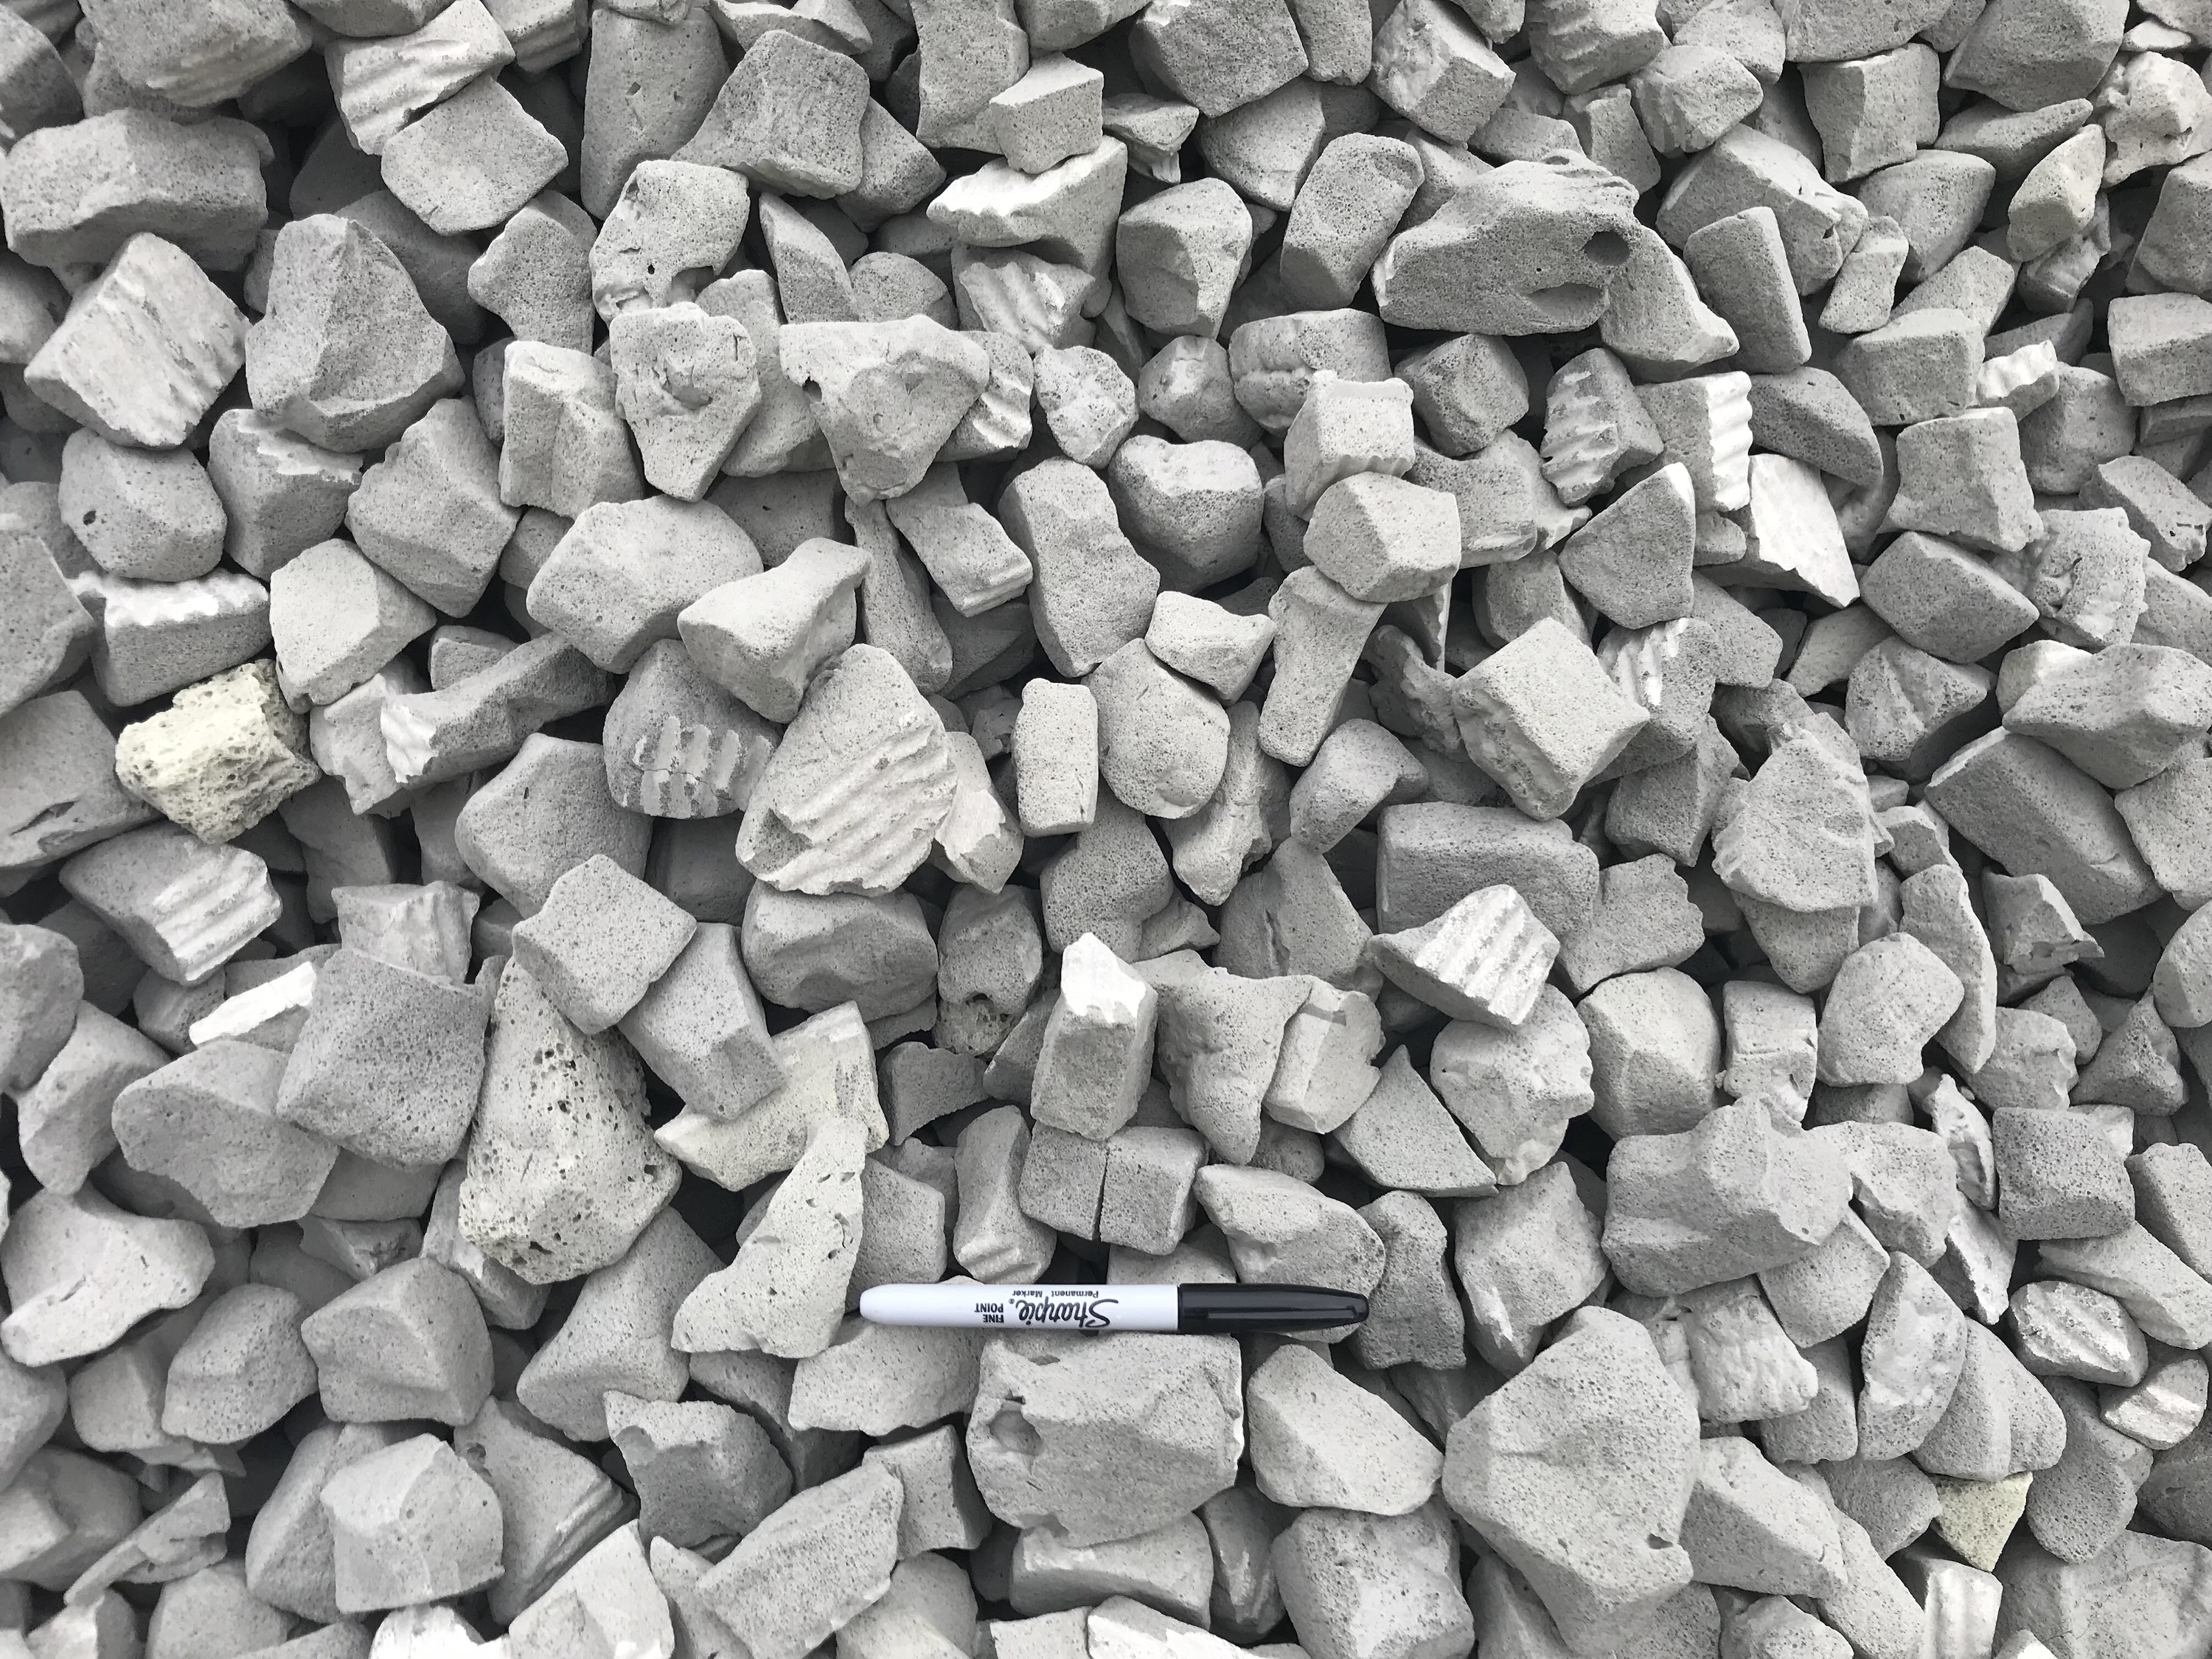 Foam glass aggregate cost much less to manufacture, ship and use than other forms of lightweight fill.